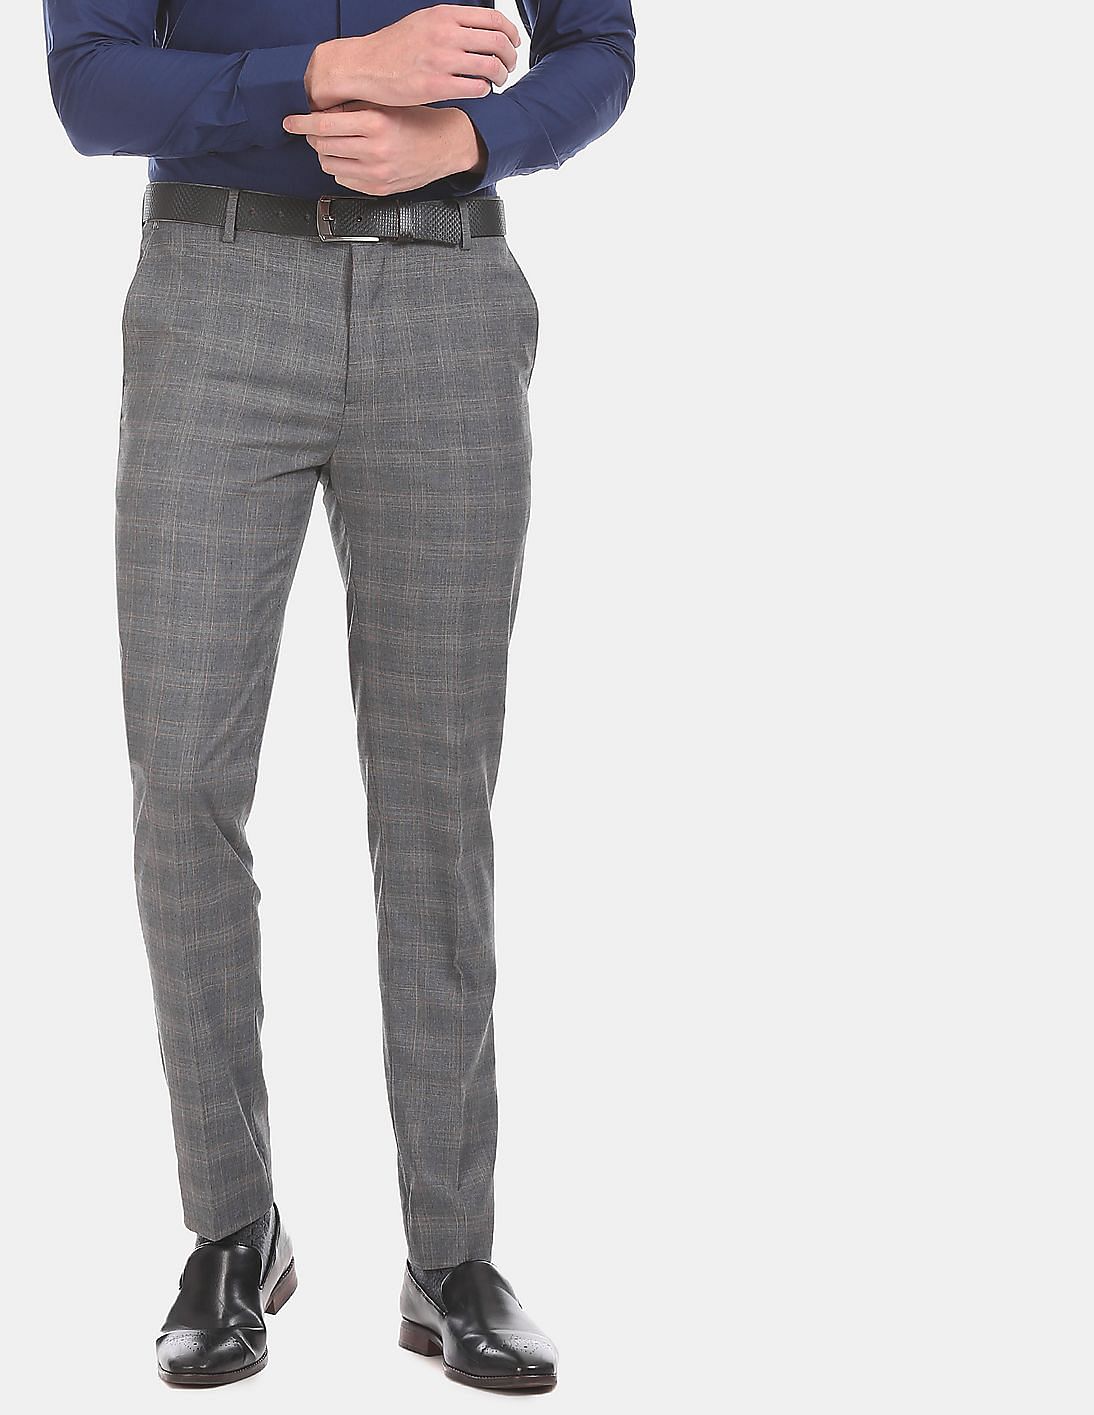 Buy USPA Tailored Men Grey Super Slim Fit Check Formal Trousers - NNNOW.com